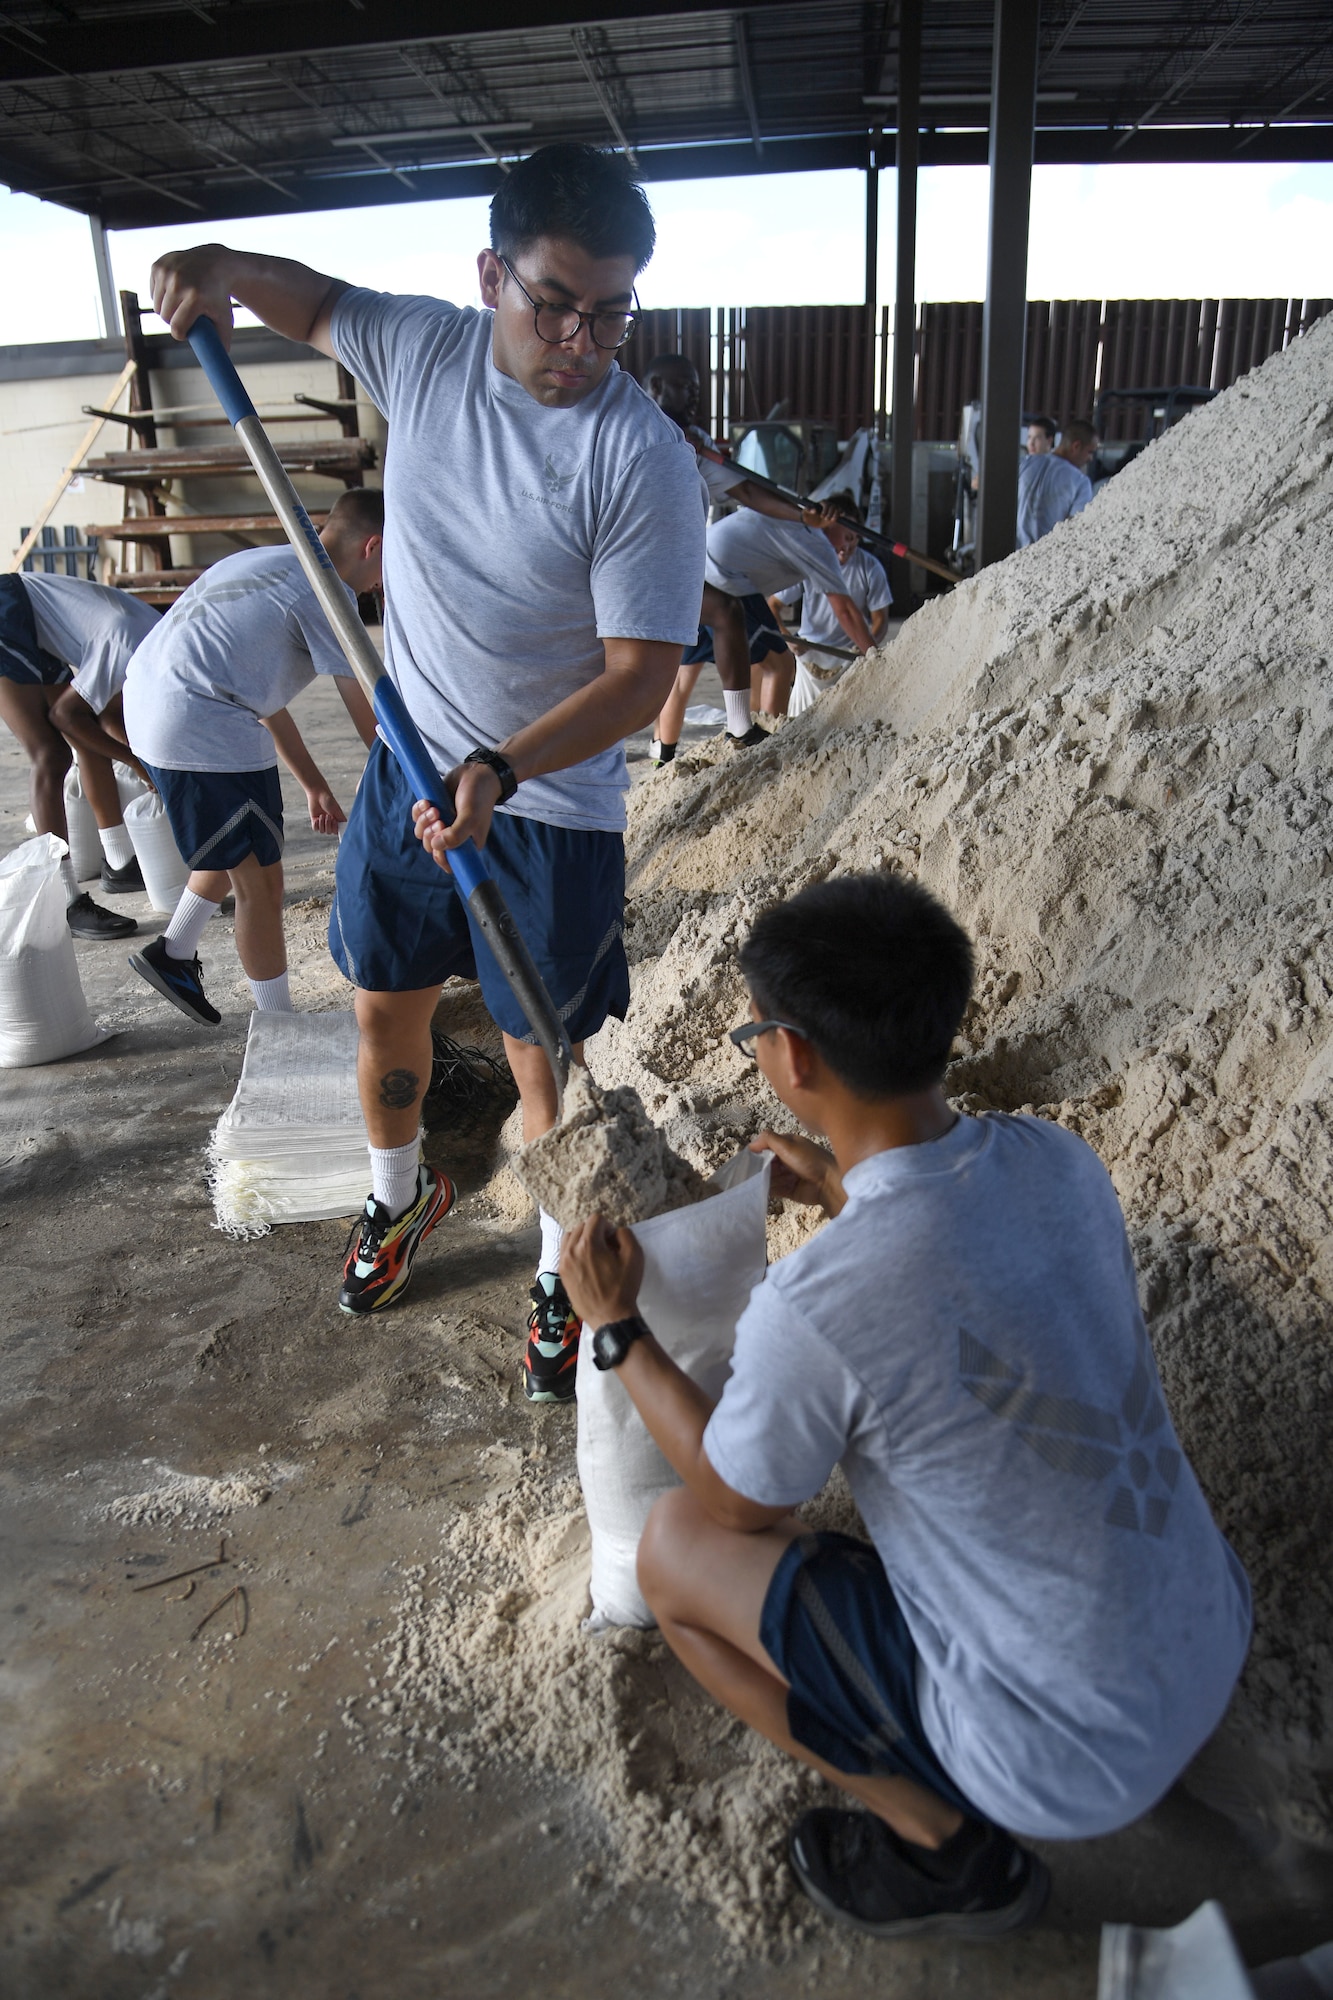 U.S. Air Force Airmen 1st Class Eric Velasco and Steven Esteves, 338th Training Squadron students, fill sand bags in preparation for the 2022 hurricane season at Keesler Air Force Base, Mississippi, June 27, 2022. Over 40 Airmen from the 338th TRS assisted the 81st Civil Engineer Squadron with filling more than 2500 sand bags. Hurricane season runs from June 1 through November 30. (U.S. Air Force photo by Kemberly Groue)